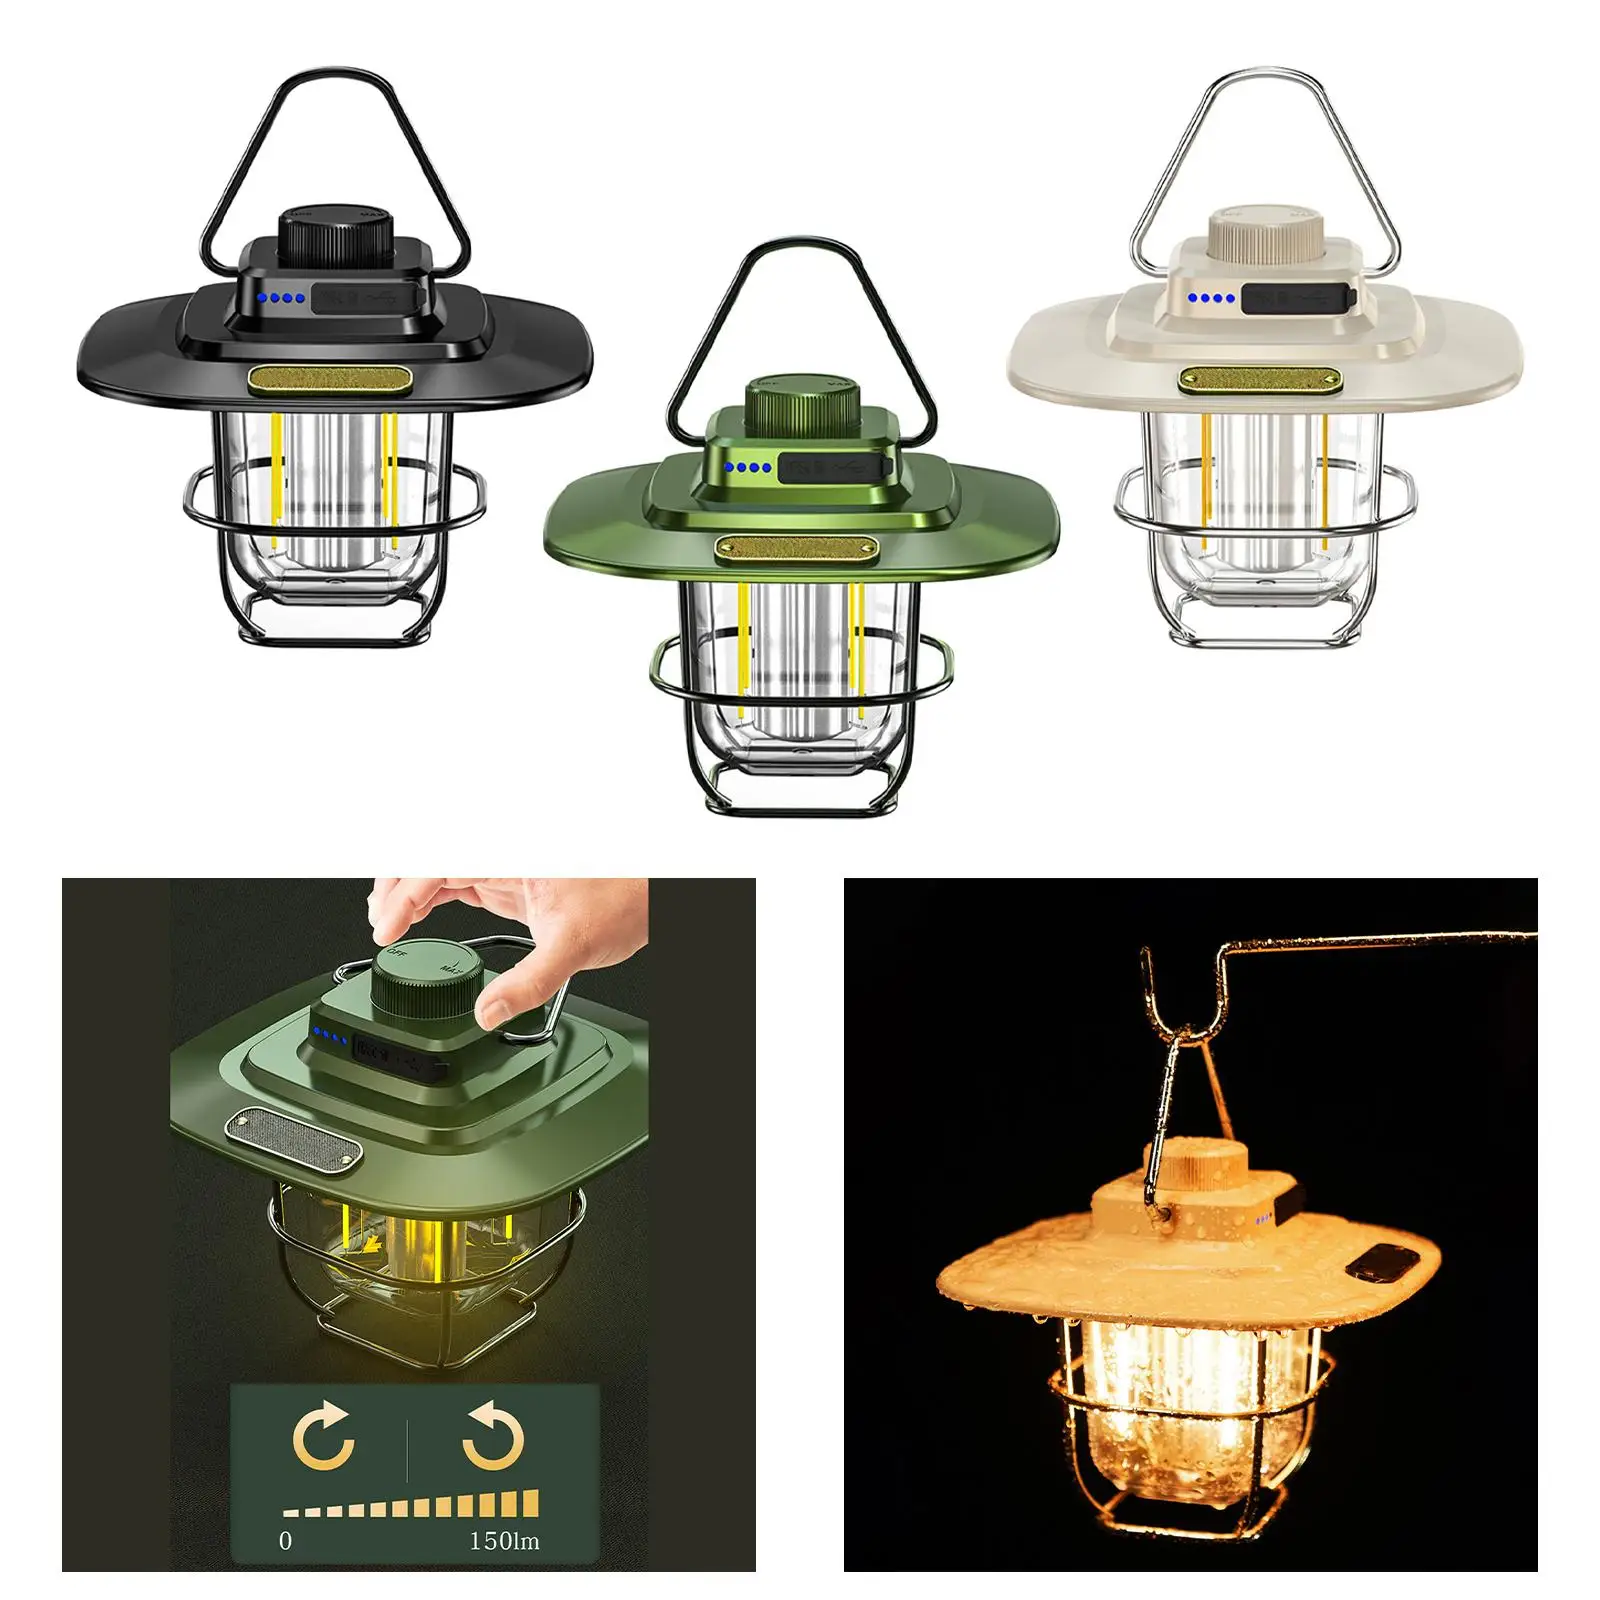 Mini LED Camping Lantern Night Lamp Portable Landscaping Lighting USB Charging Waterproof Tent Light for Garden Indoors Outdoors